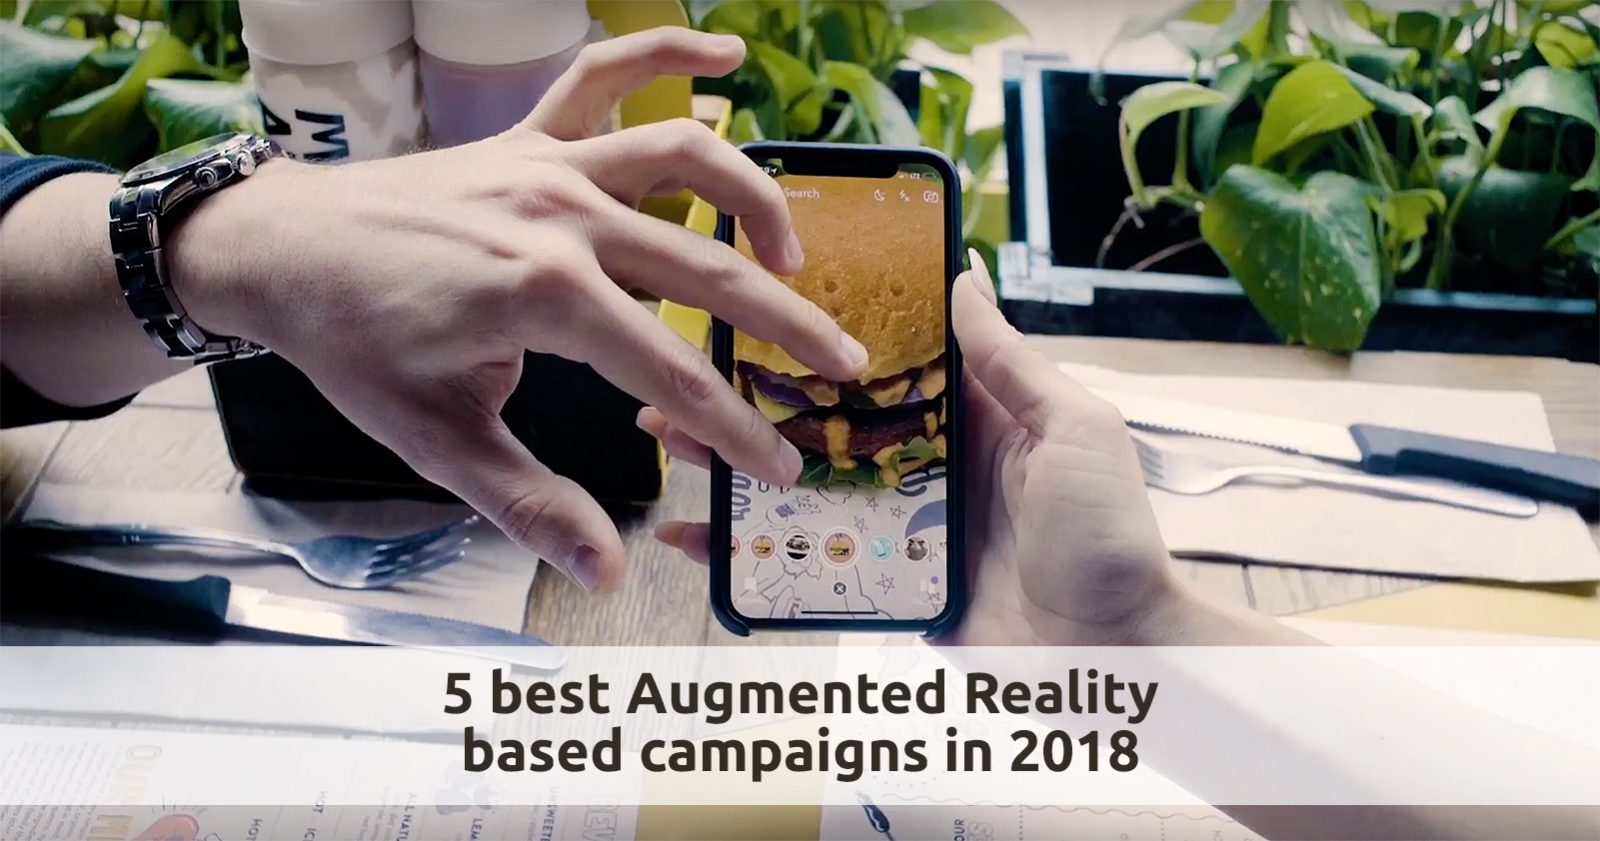 Augmented Reality technology based campaigns in 2018